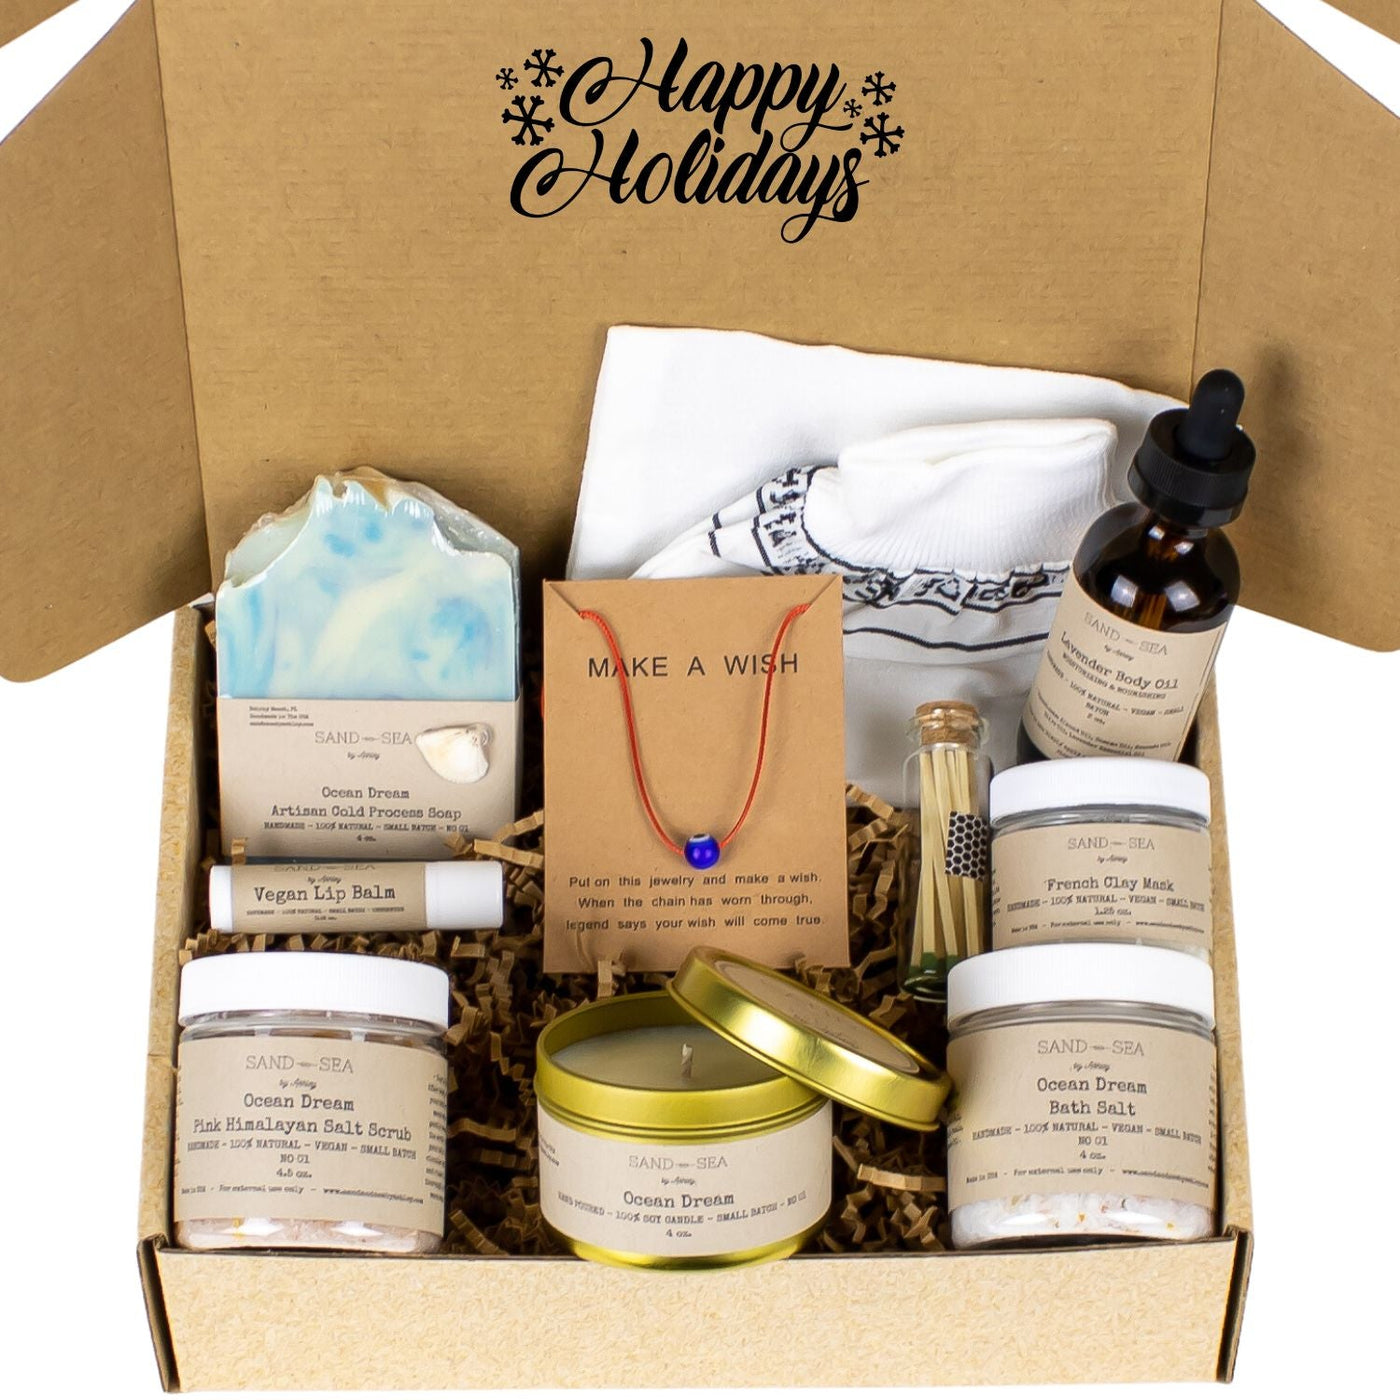 Happy Holidays Spa Gift Box for Her - Handmade Artisan Ocean Dream Spa Gift Set for Woman 10 pieces - Sand & Sea by Ashley